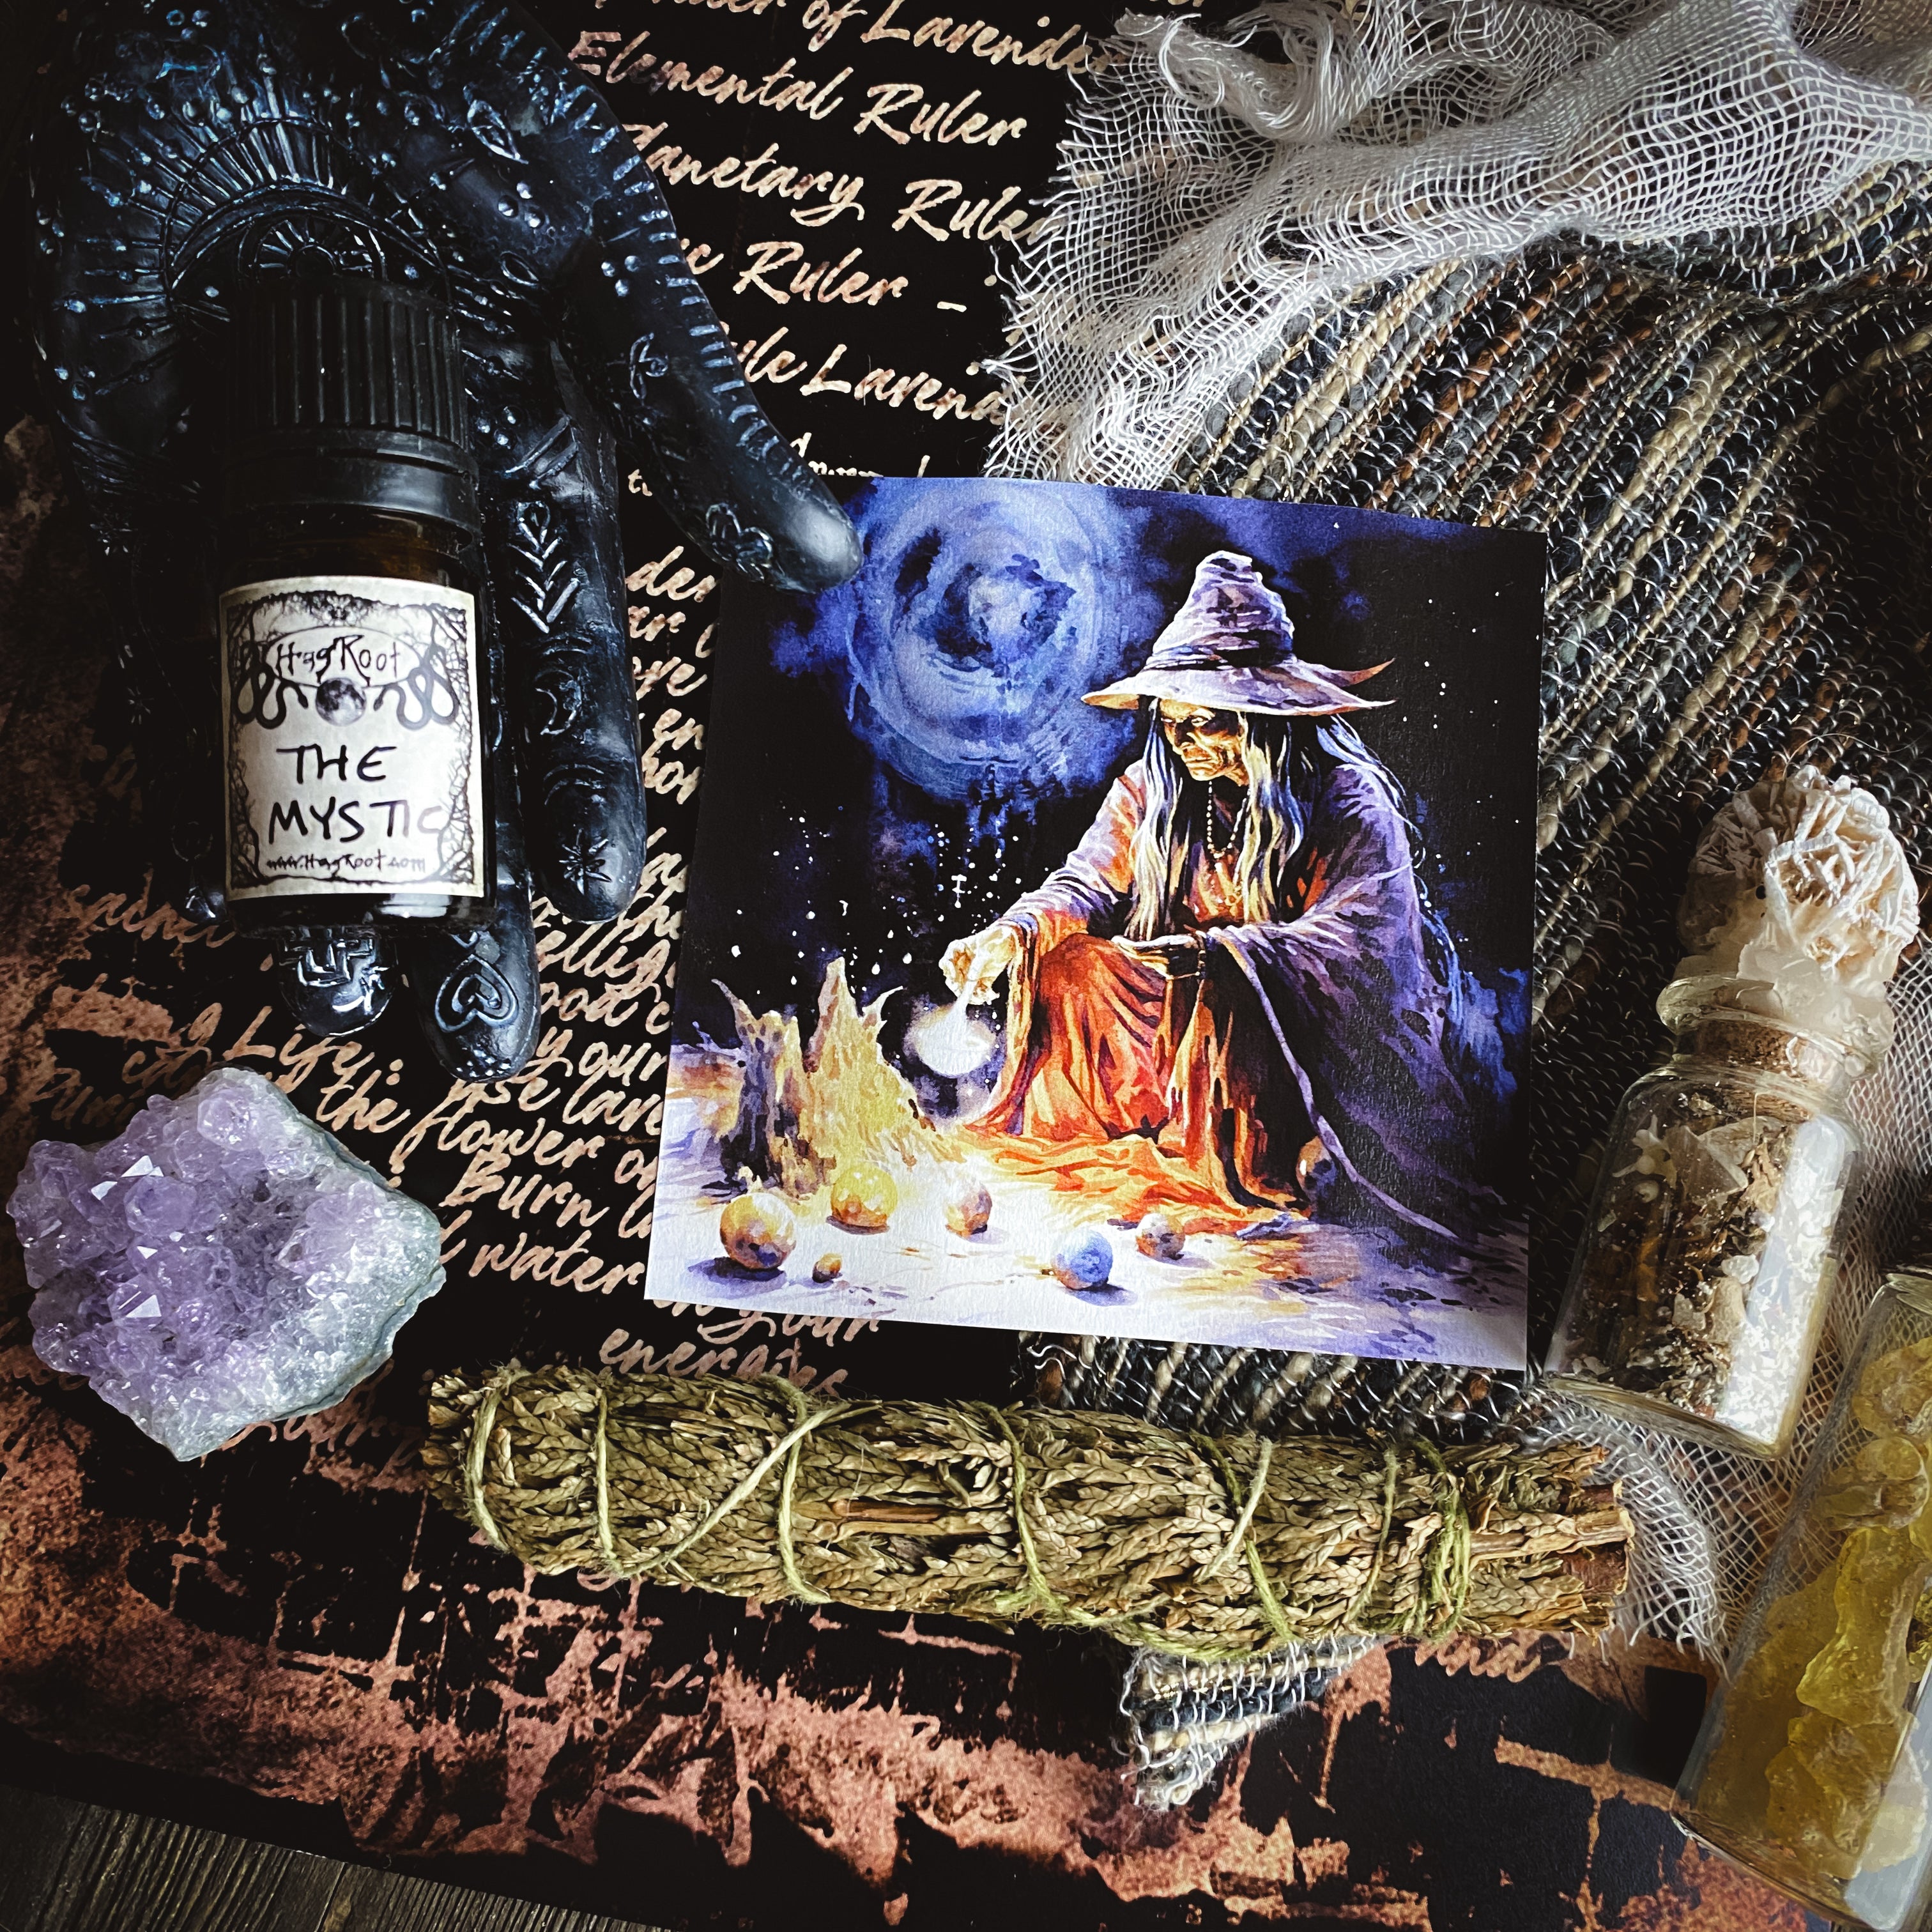 THE MYSTIC-(Patchouli, Champaka Flowers, Cedar, Amber)-Perfume, Cologne, Anointing, Ritual Oil